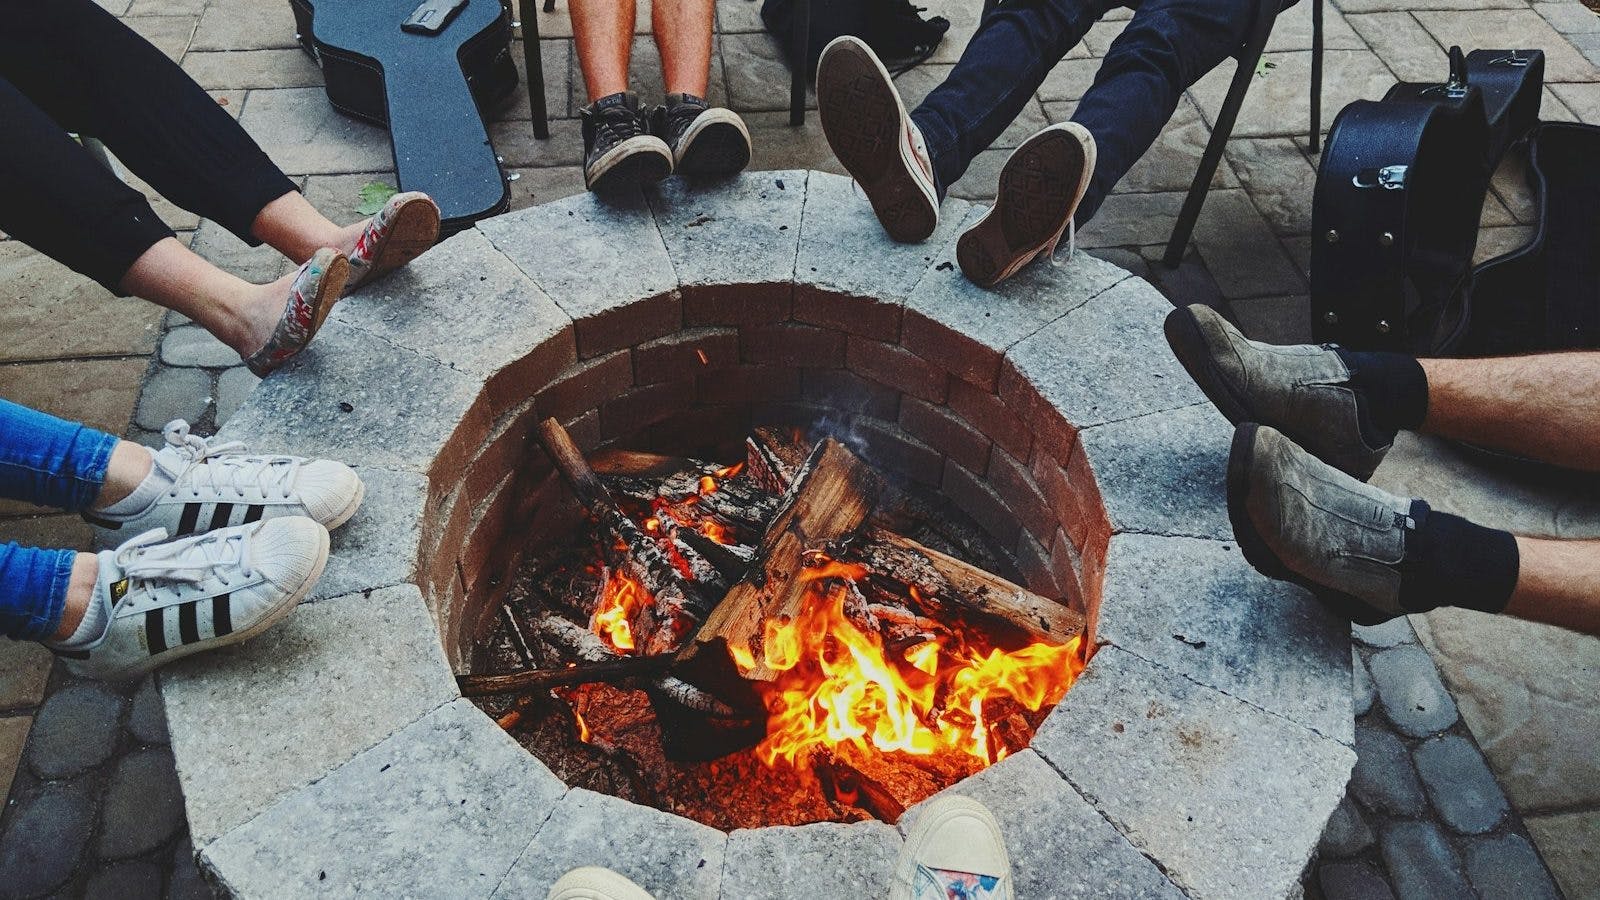 people's feet on top of firepit